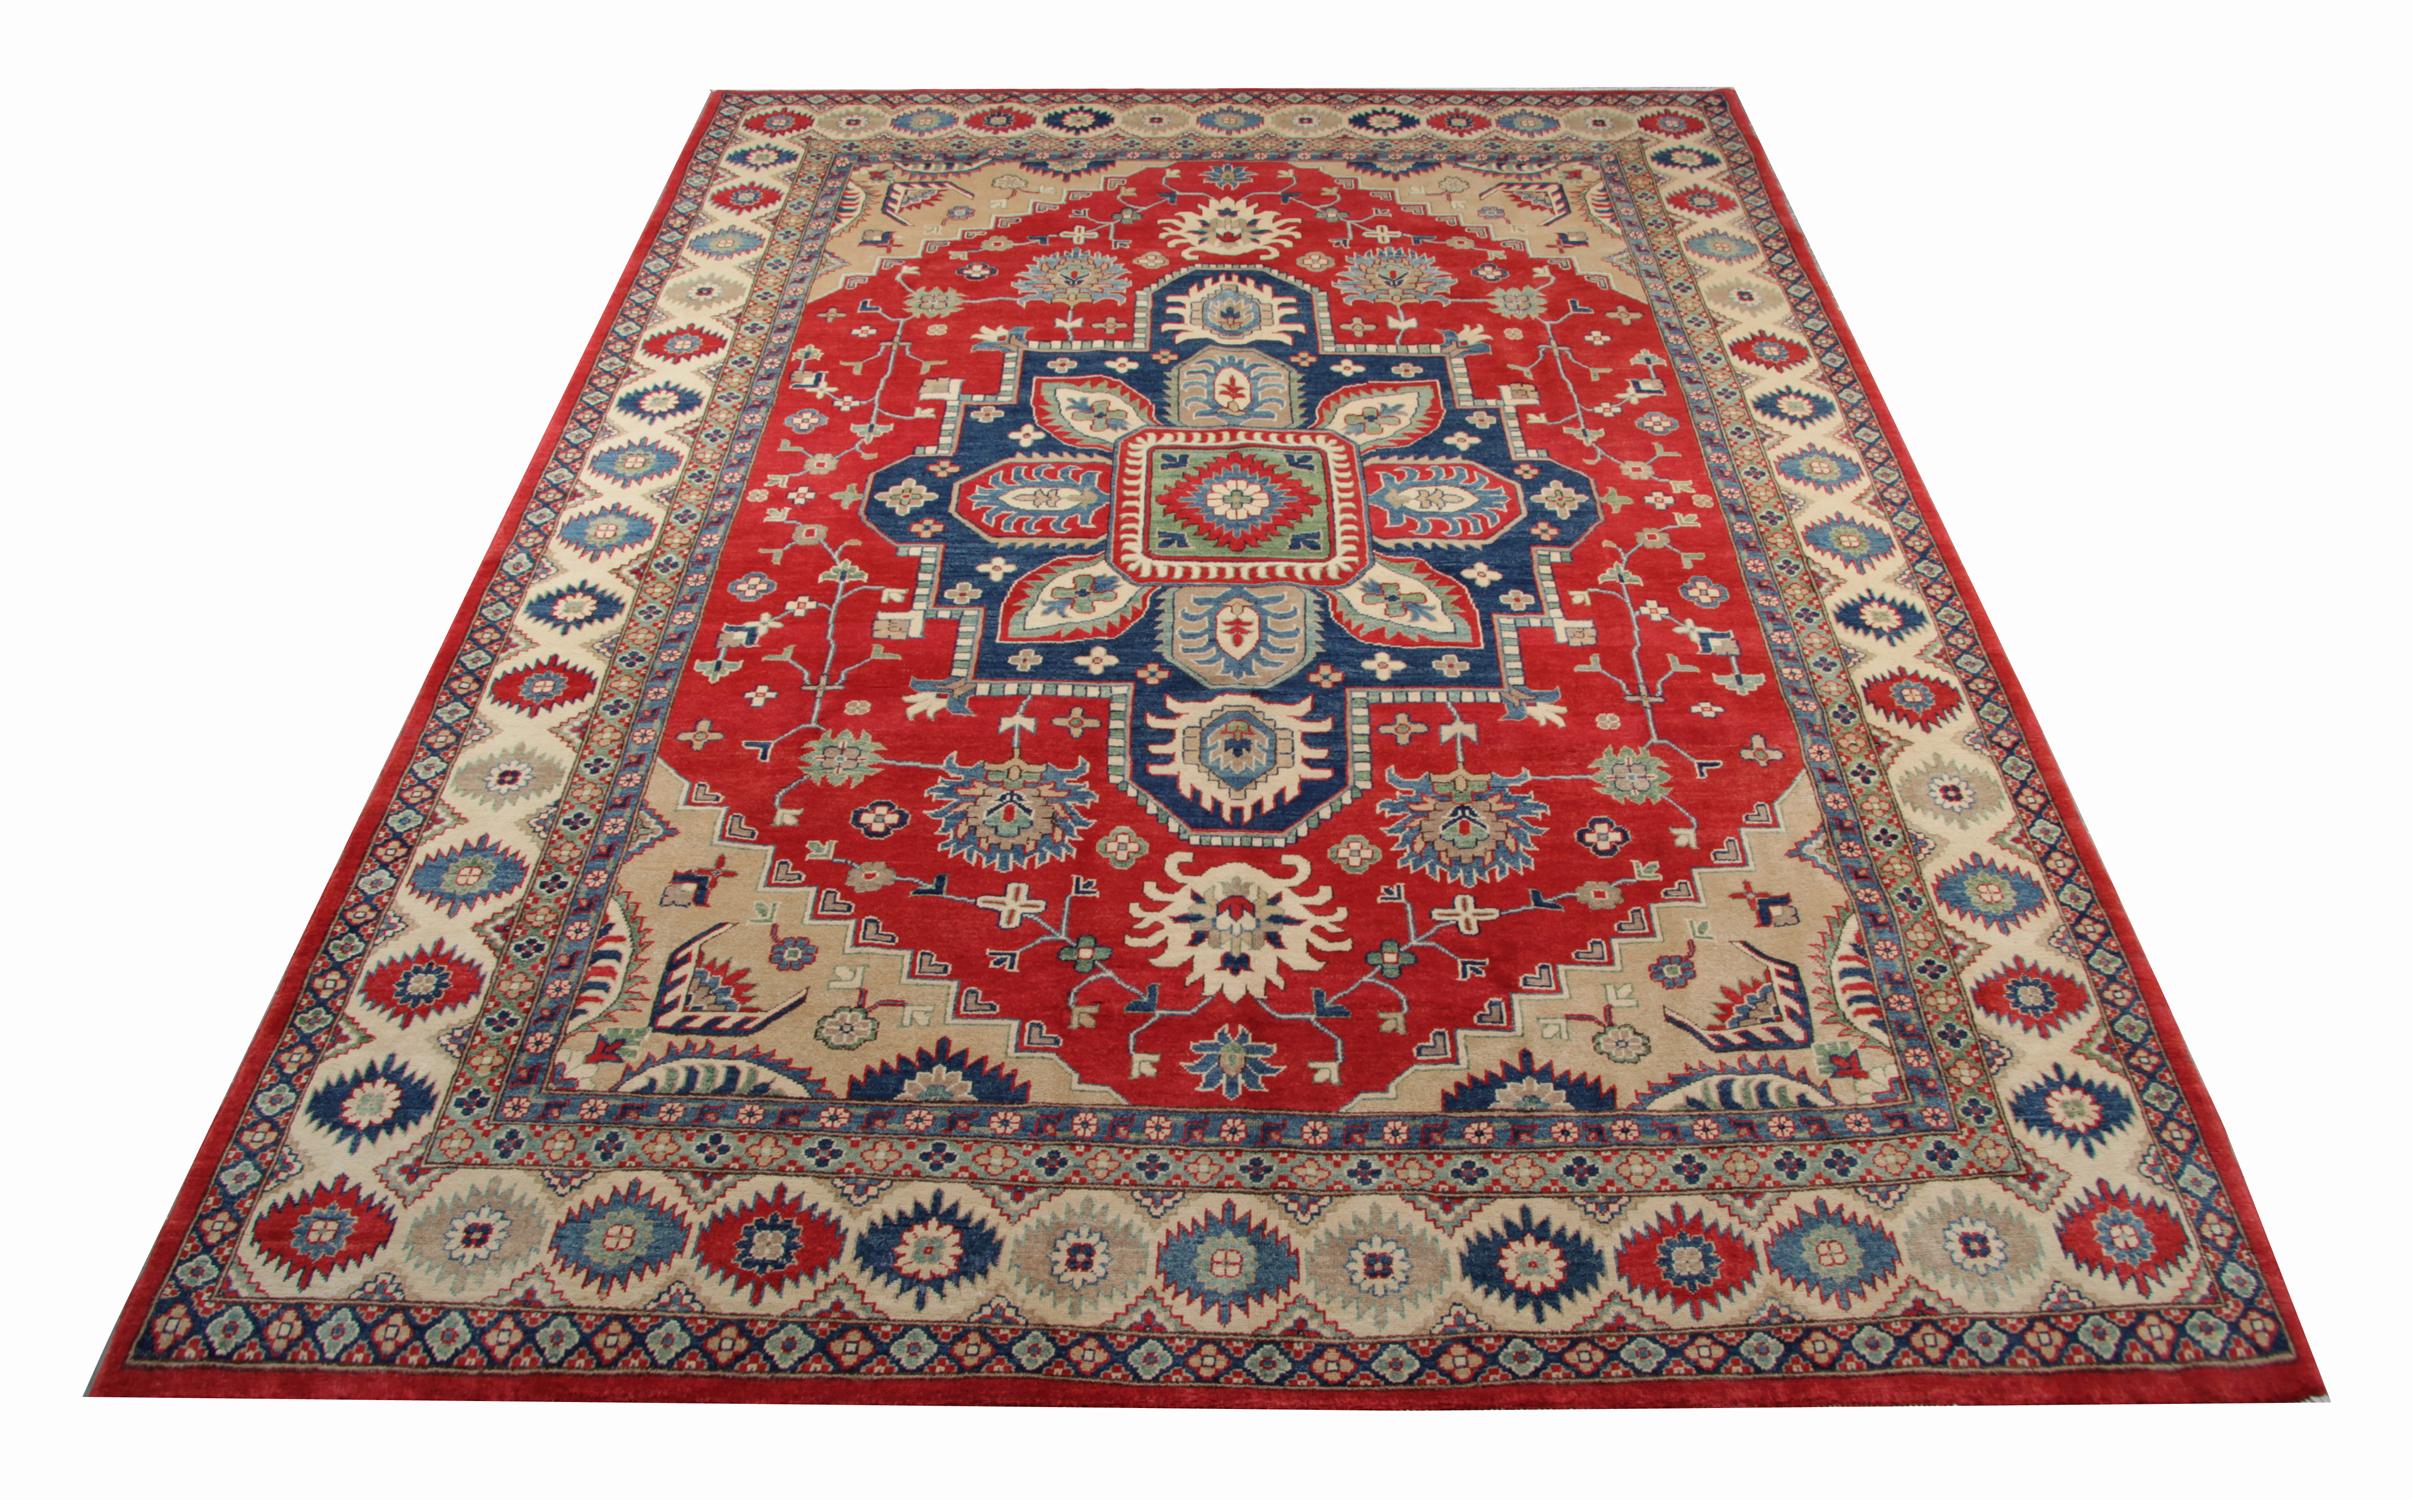 A beautiful new traditional Afghan Kazak rug features a conventional tribal medallion design woven in beige, blue and green accents through the centre on a red field. The design is then finished with a highly-detailed repeat pattern border that